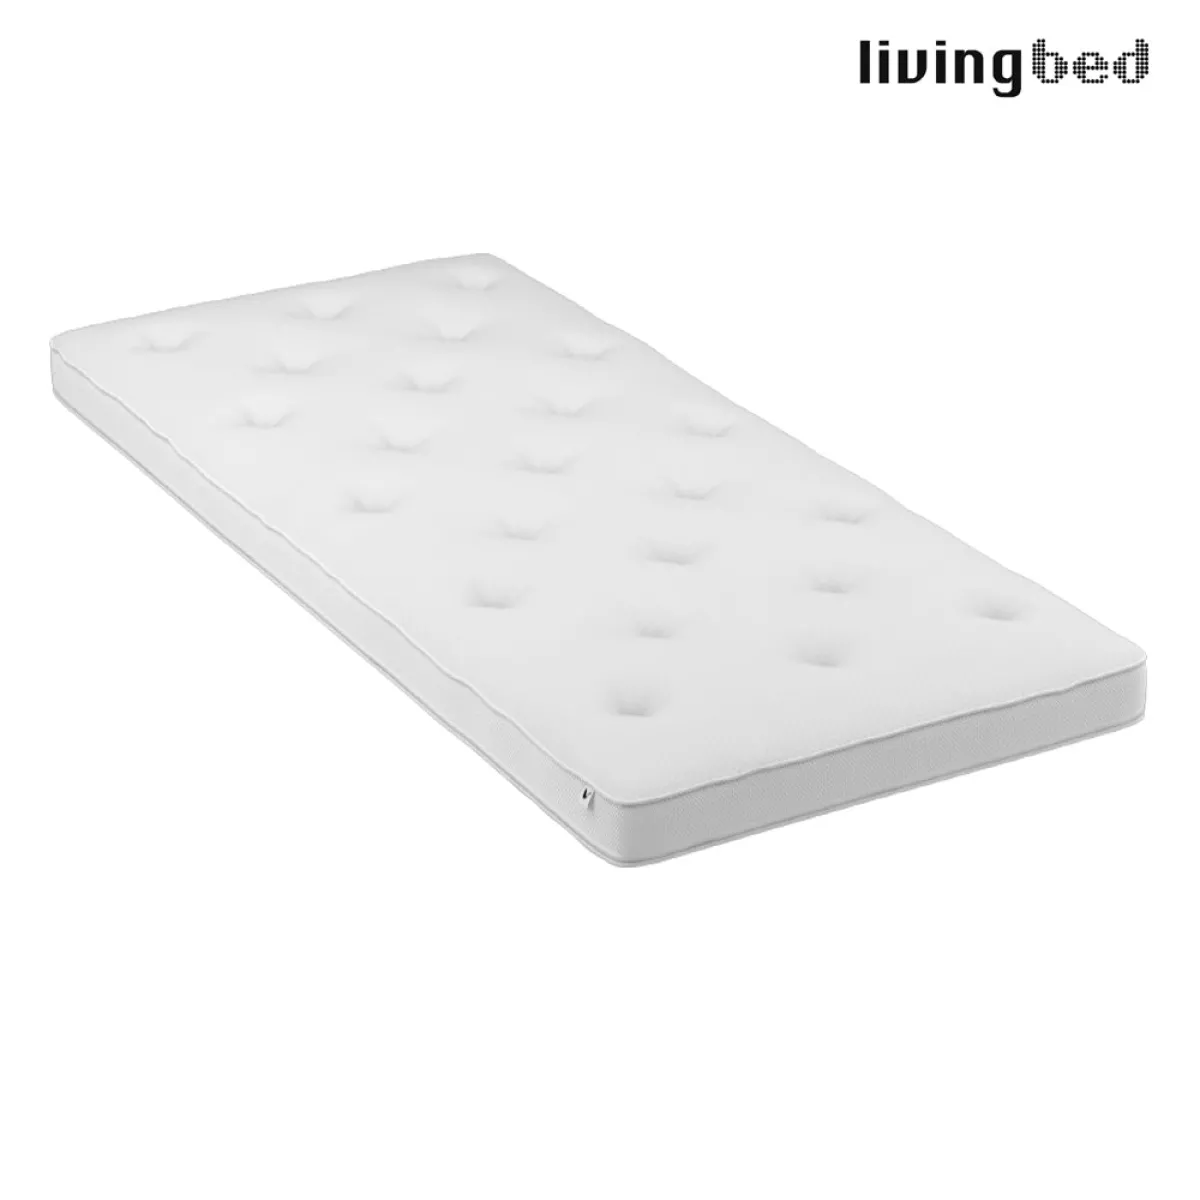 #2 - Livingbed Lux - Quiltet sommerxvinter Latex topmadras